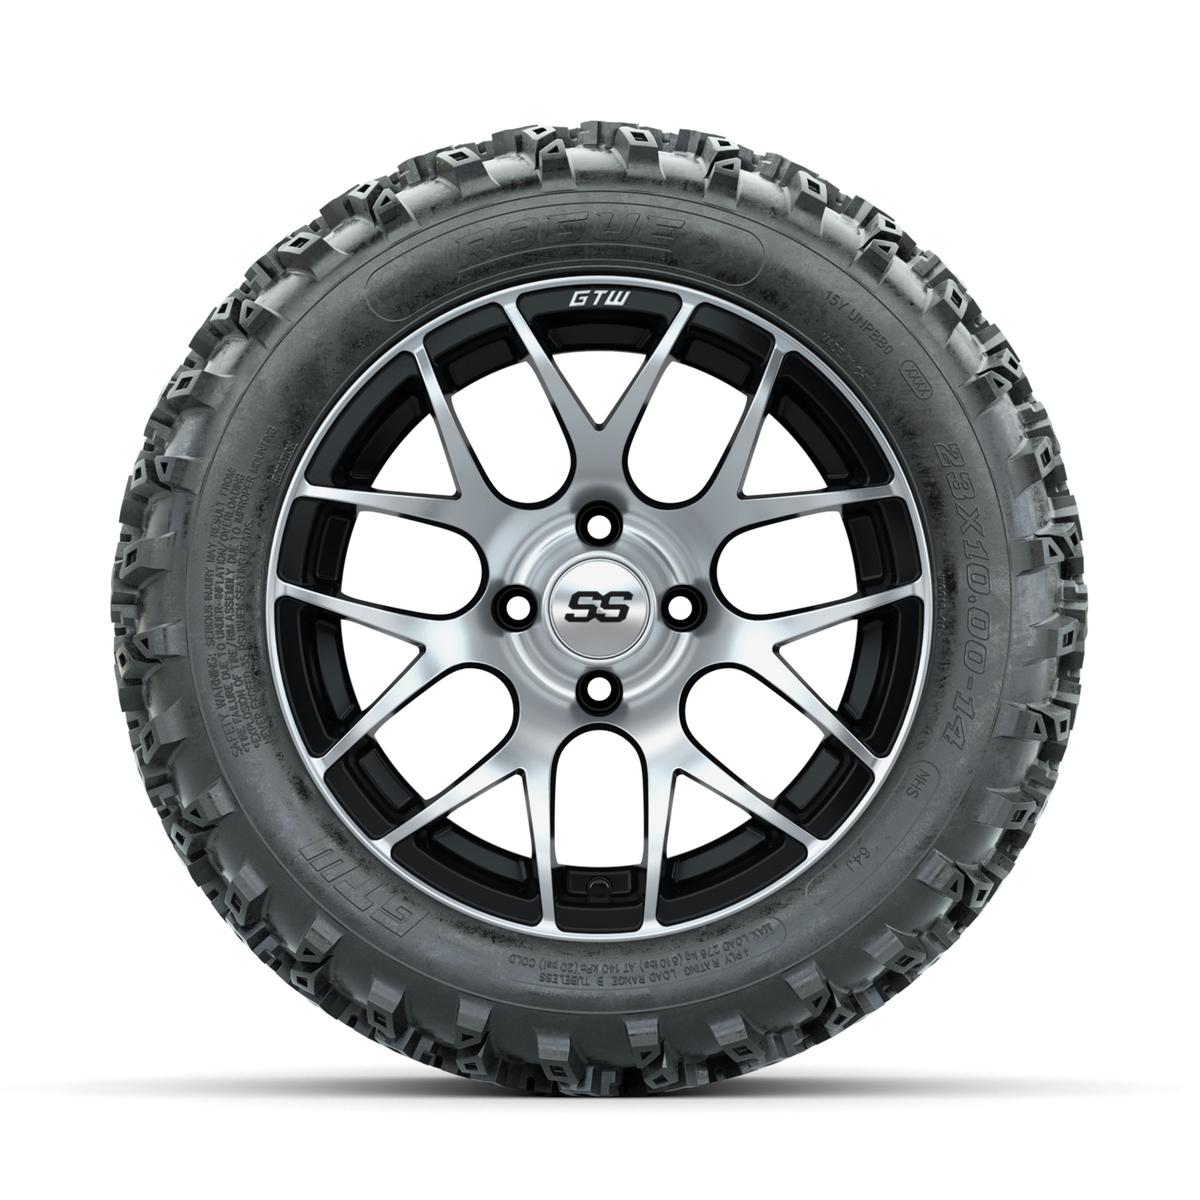 GTW Pursuit Machined/Black 14 in Wheels with 23x10.00-14 Rogue All Terrain Tires – Full Set